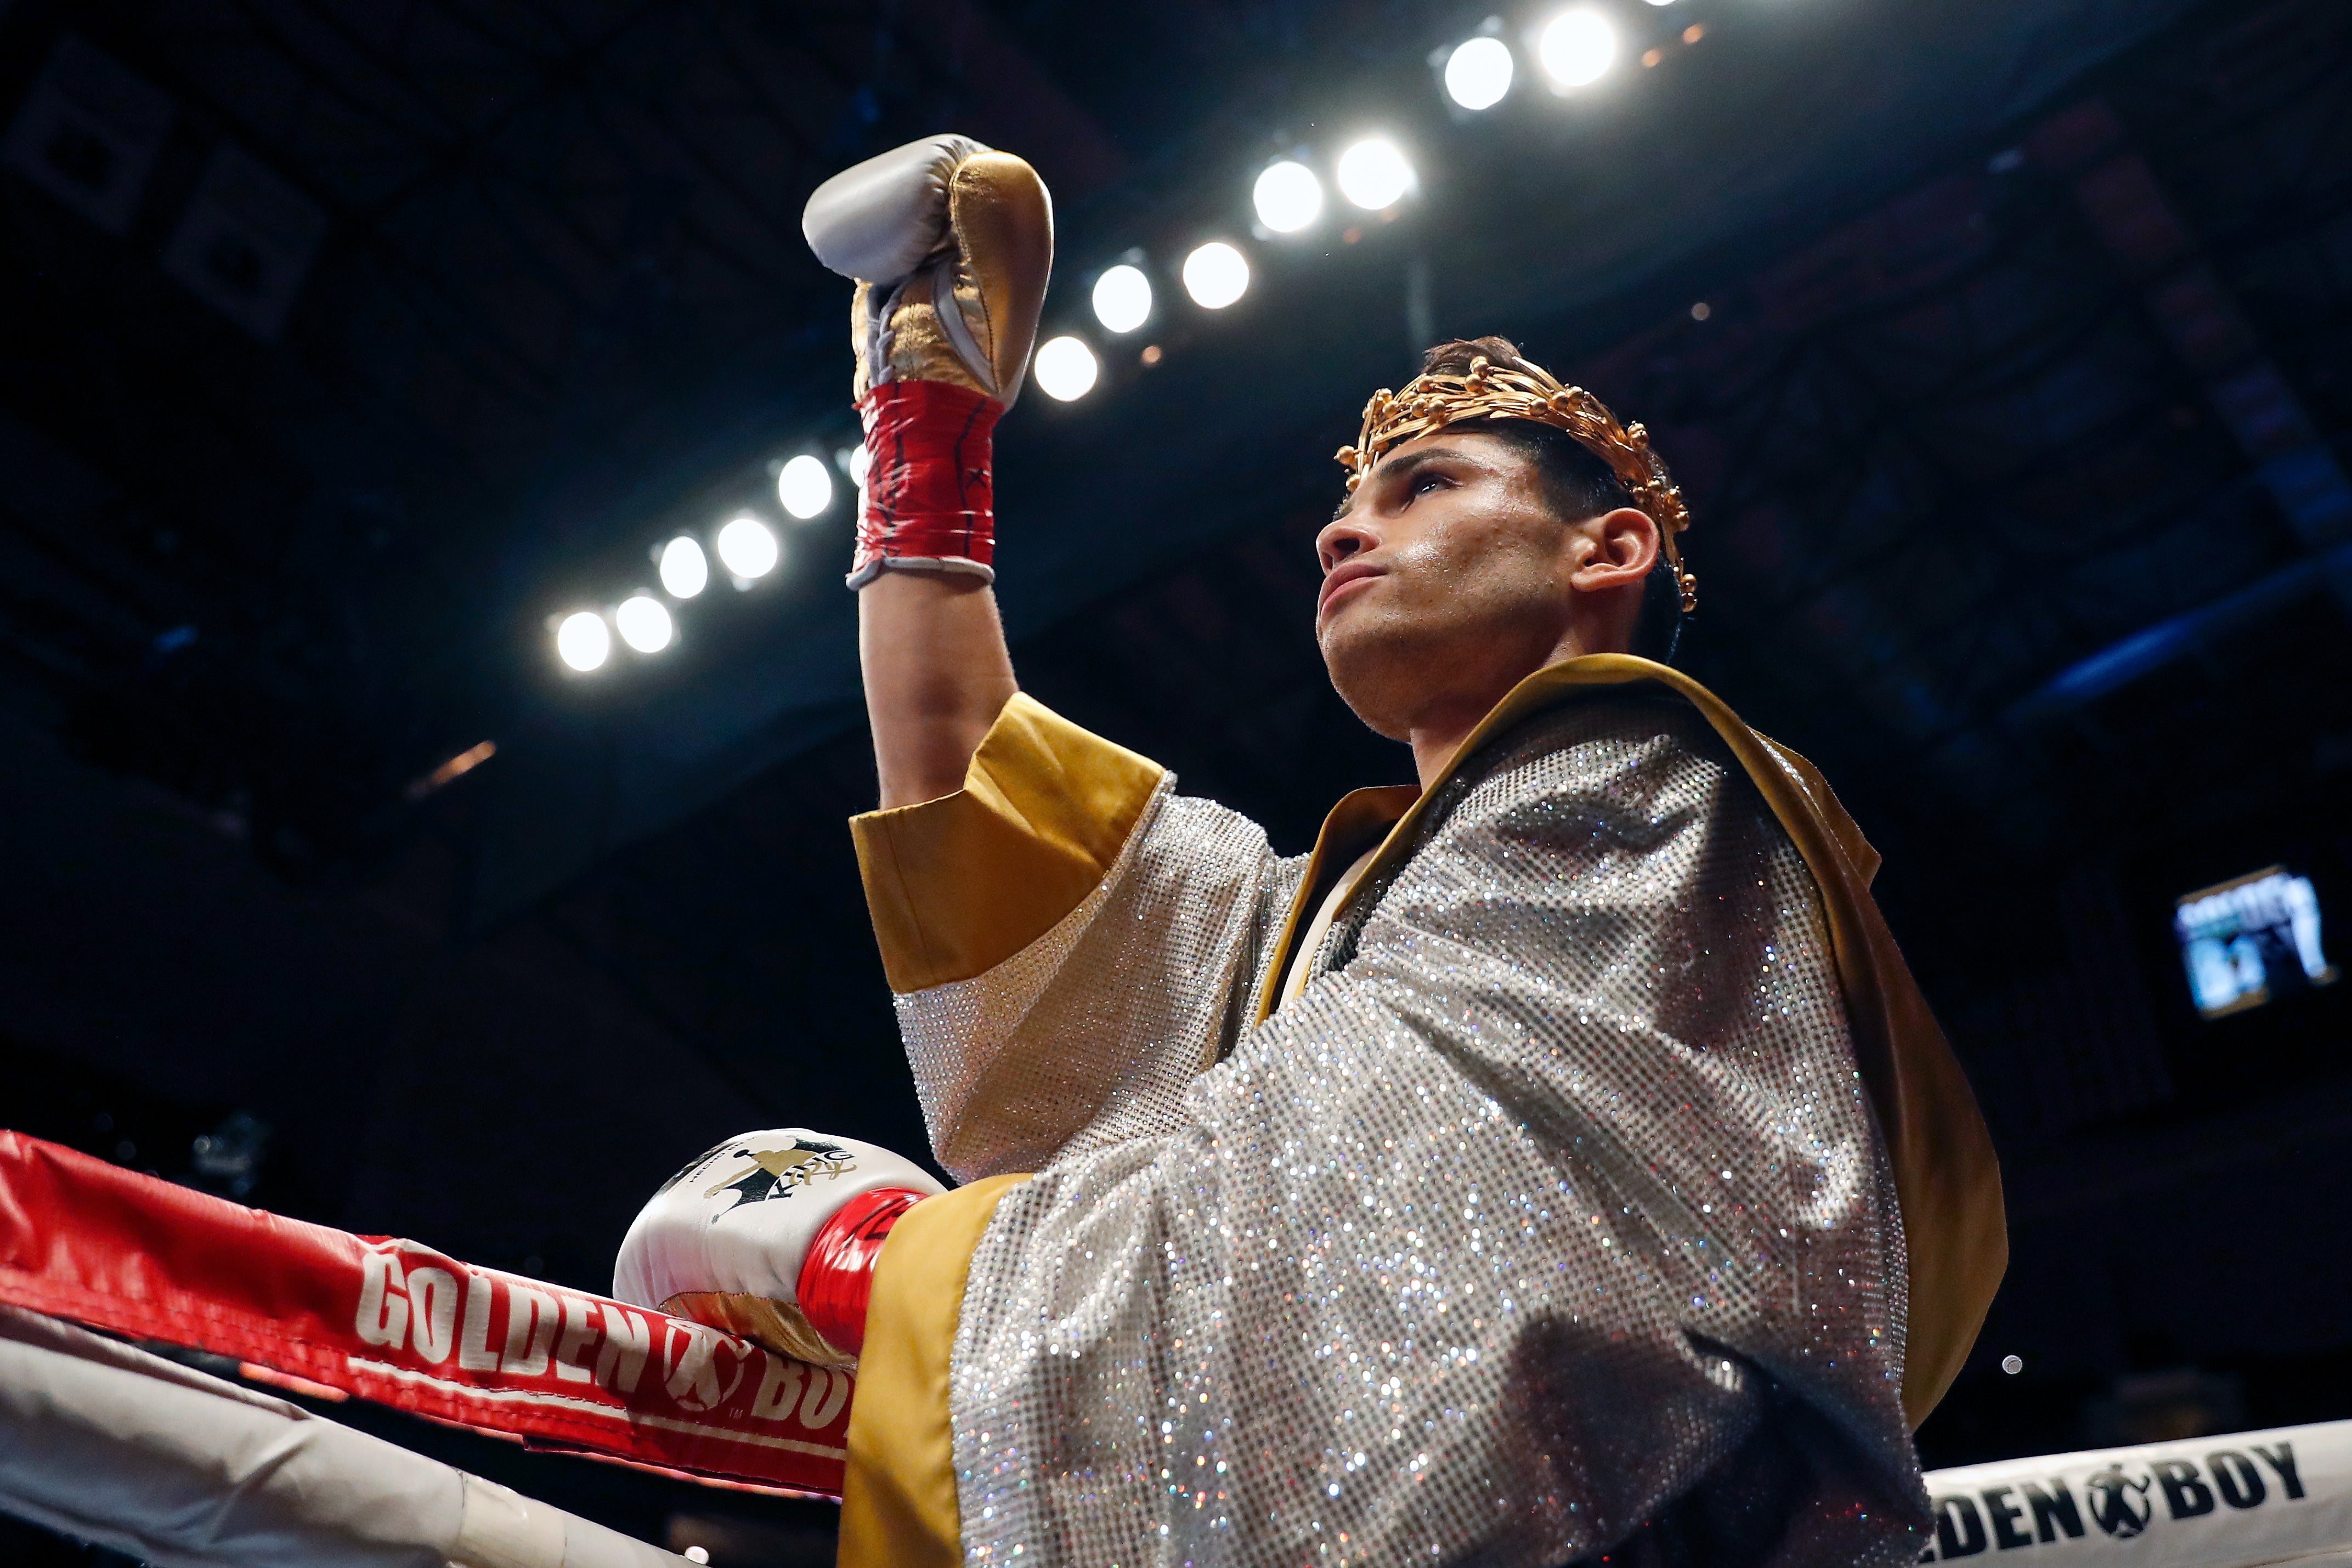 Ryan Garcia Lightweight star withdraws from Javier Fortuna bout to focus on his health and wellbeing The Independent